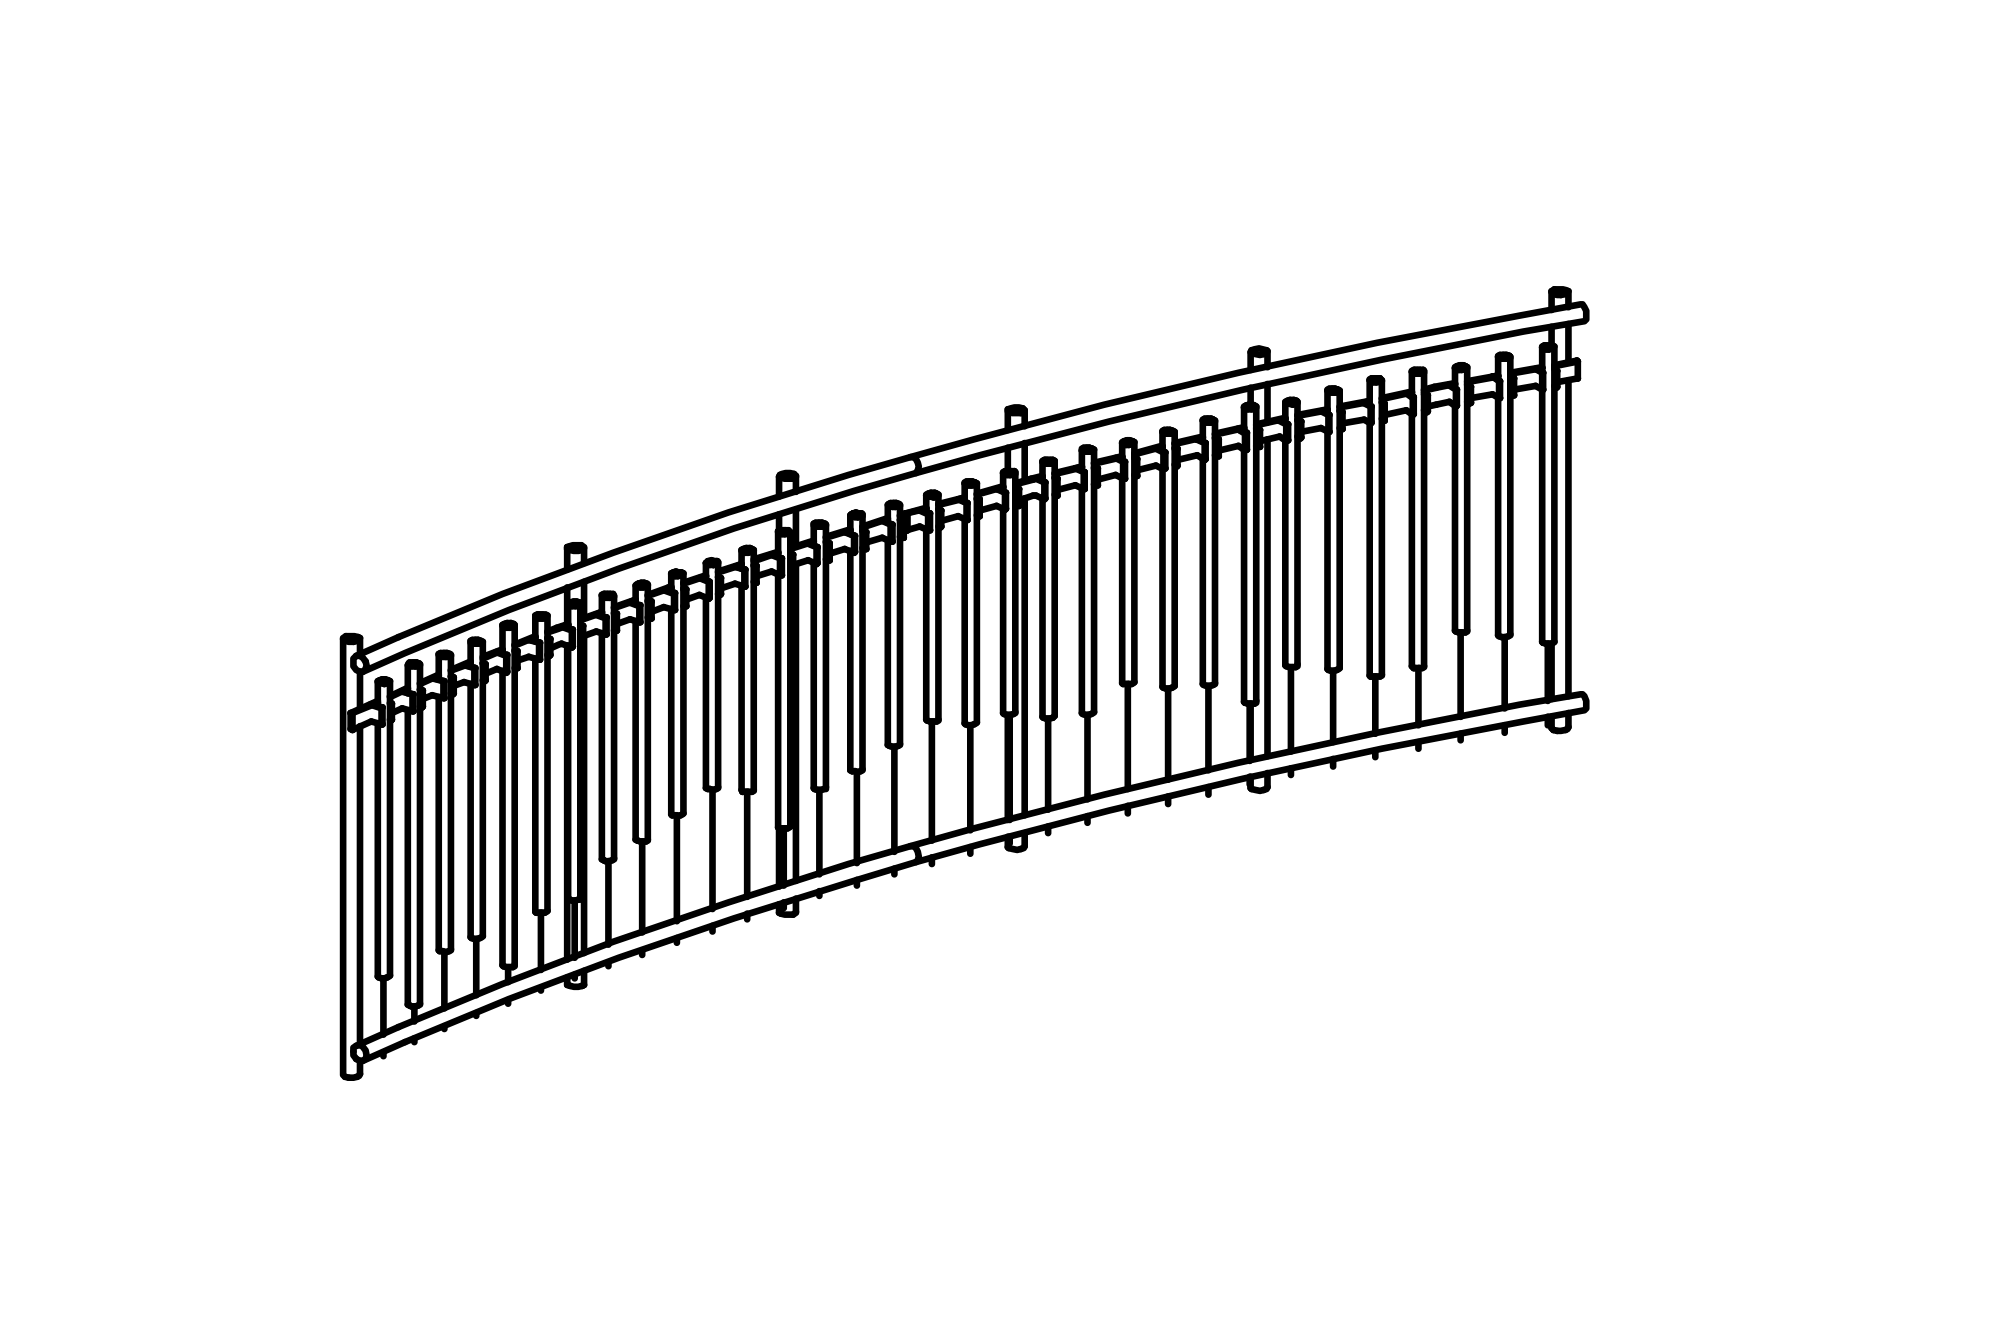 Melodic Fence, melody "Frère Jaques" with equipment made of stainless steel